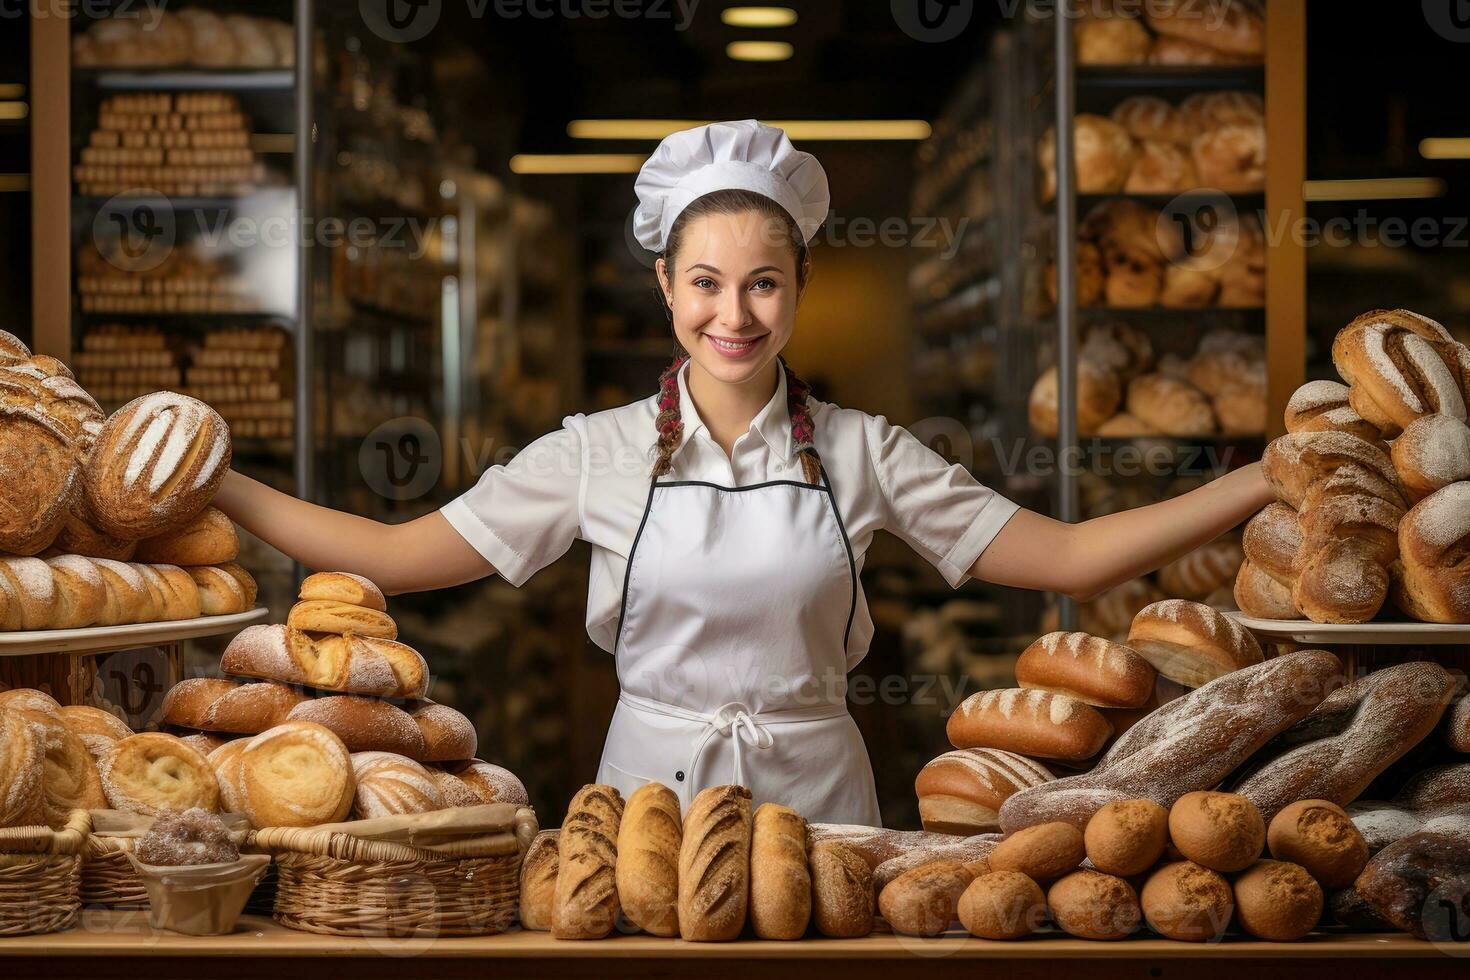 https://static.vecteezy.com/system/resources/previews/028/646/697/non_2x/portrait-of-a-successful-female-bakery-owner-photo.jpg